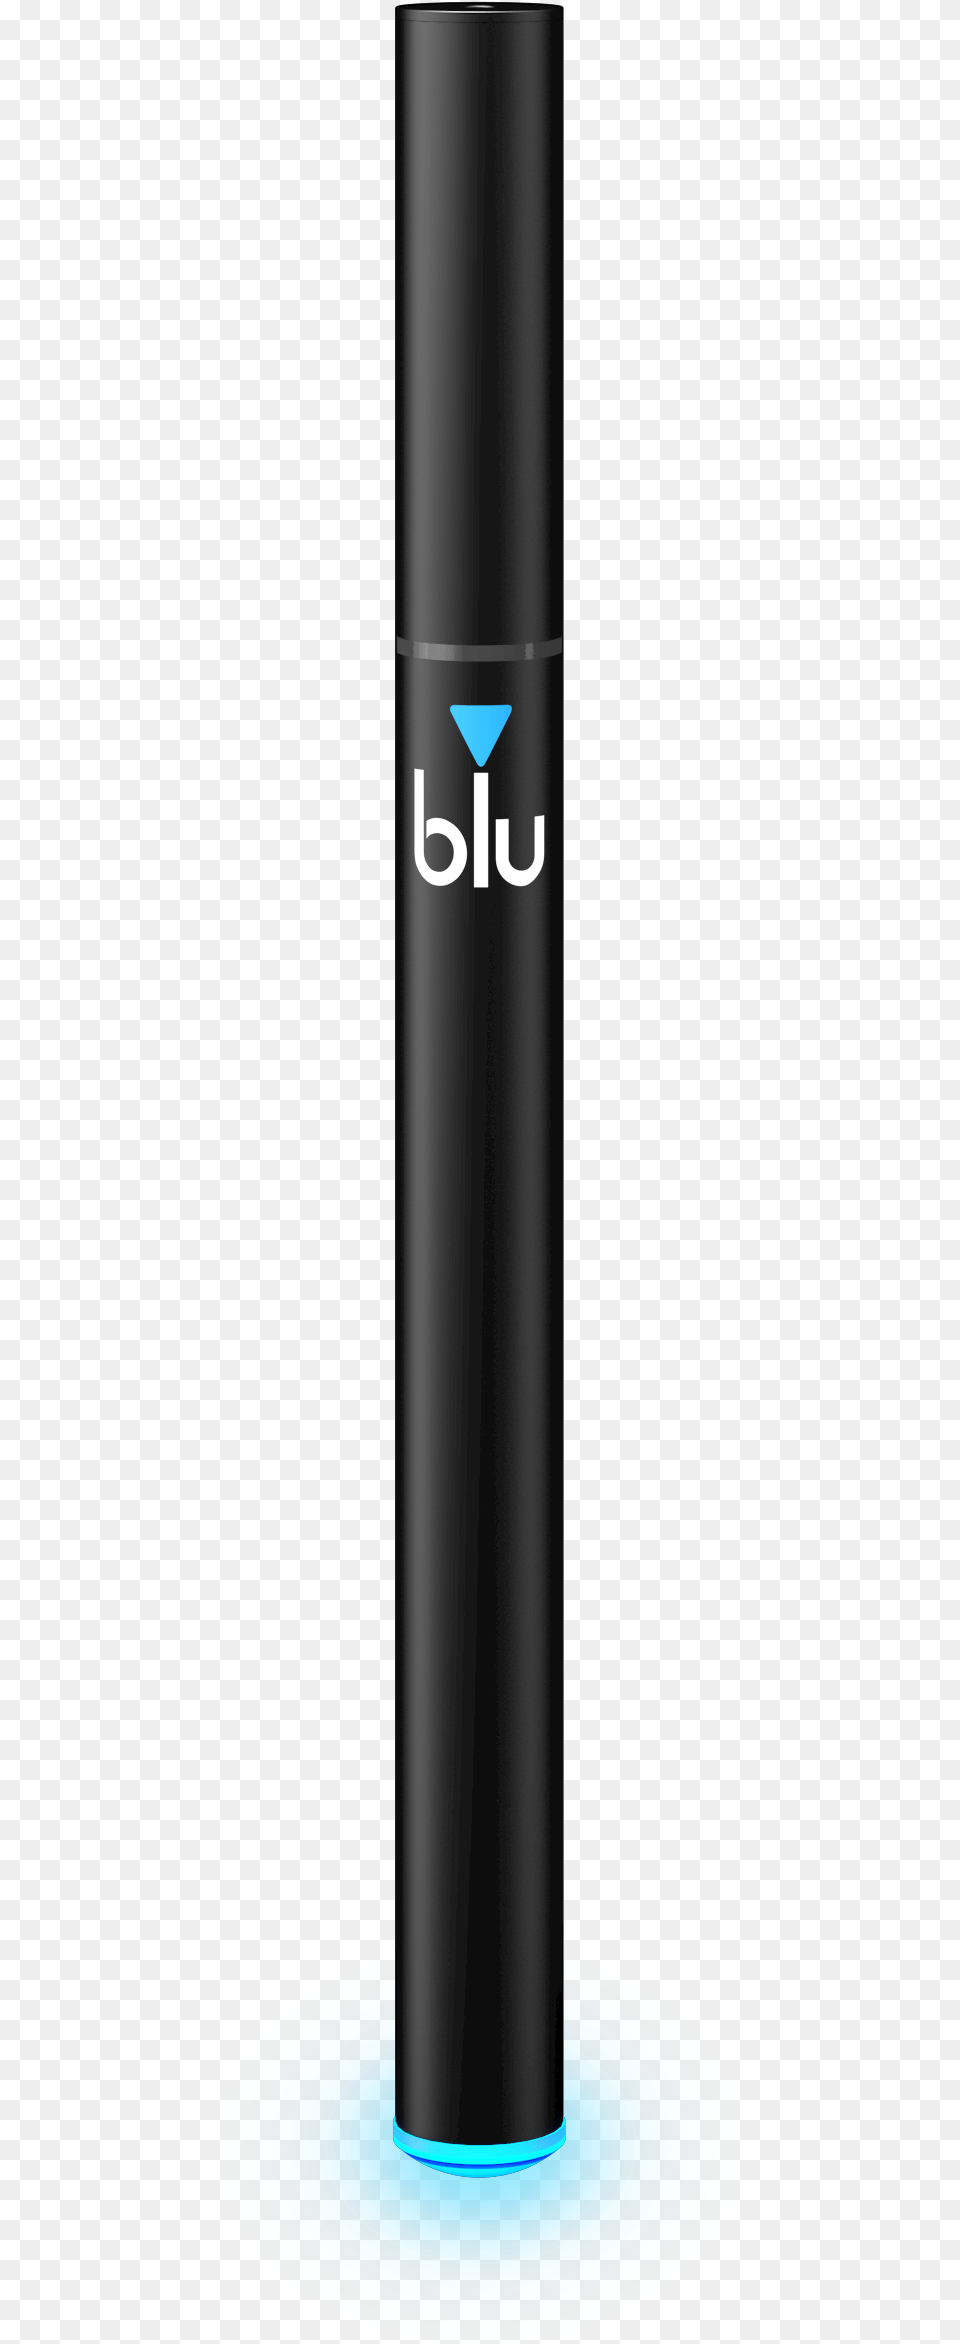 Blu Disposable Device Upright Front Mobile Phone, Bottle, Smoke Pipe, Cosmetics Png